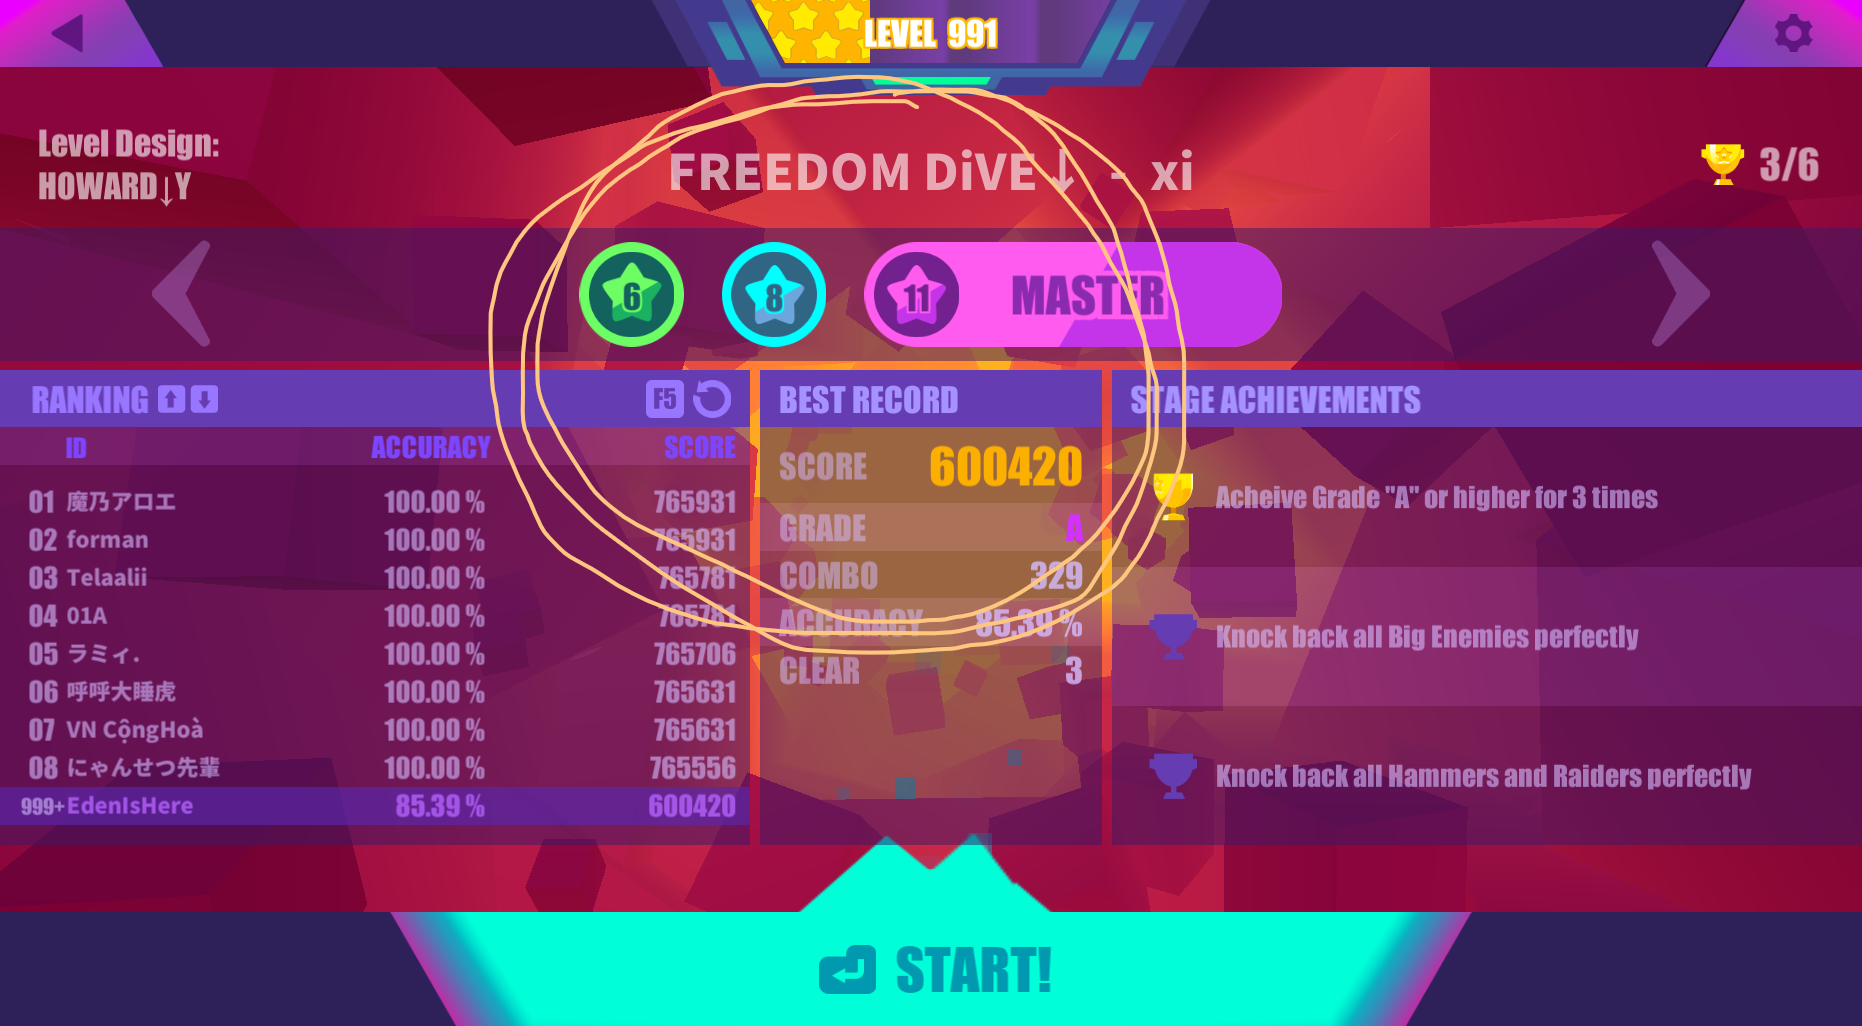 Muse Dash All Hidden Difficulties Songs Guide - FREEDOM DIVE ↓ - xi (11☆) [Give Up TREATMENT Vol.8] - DDDEC63